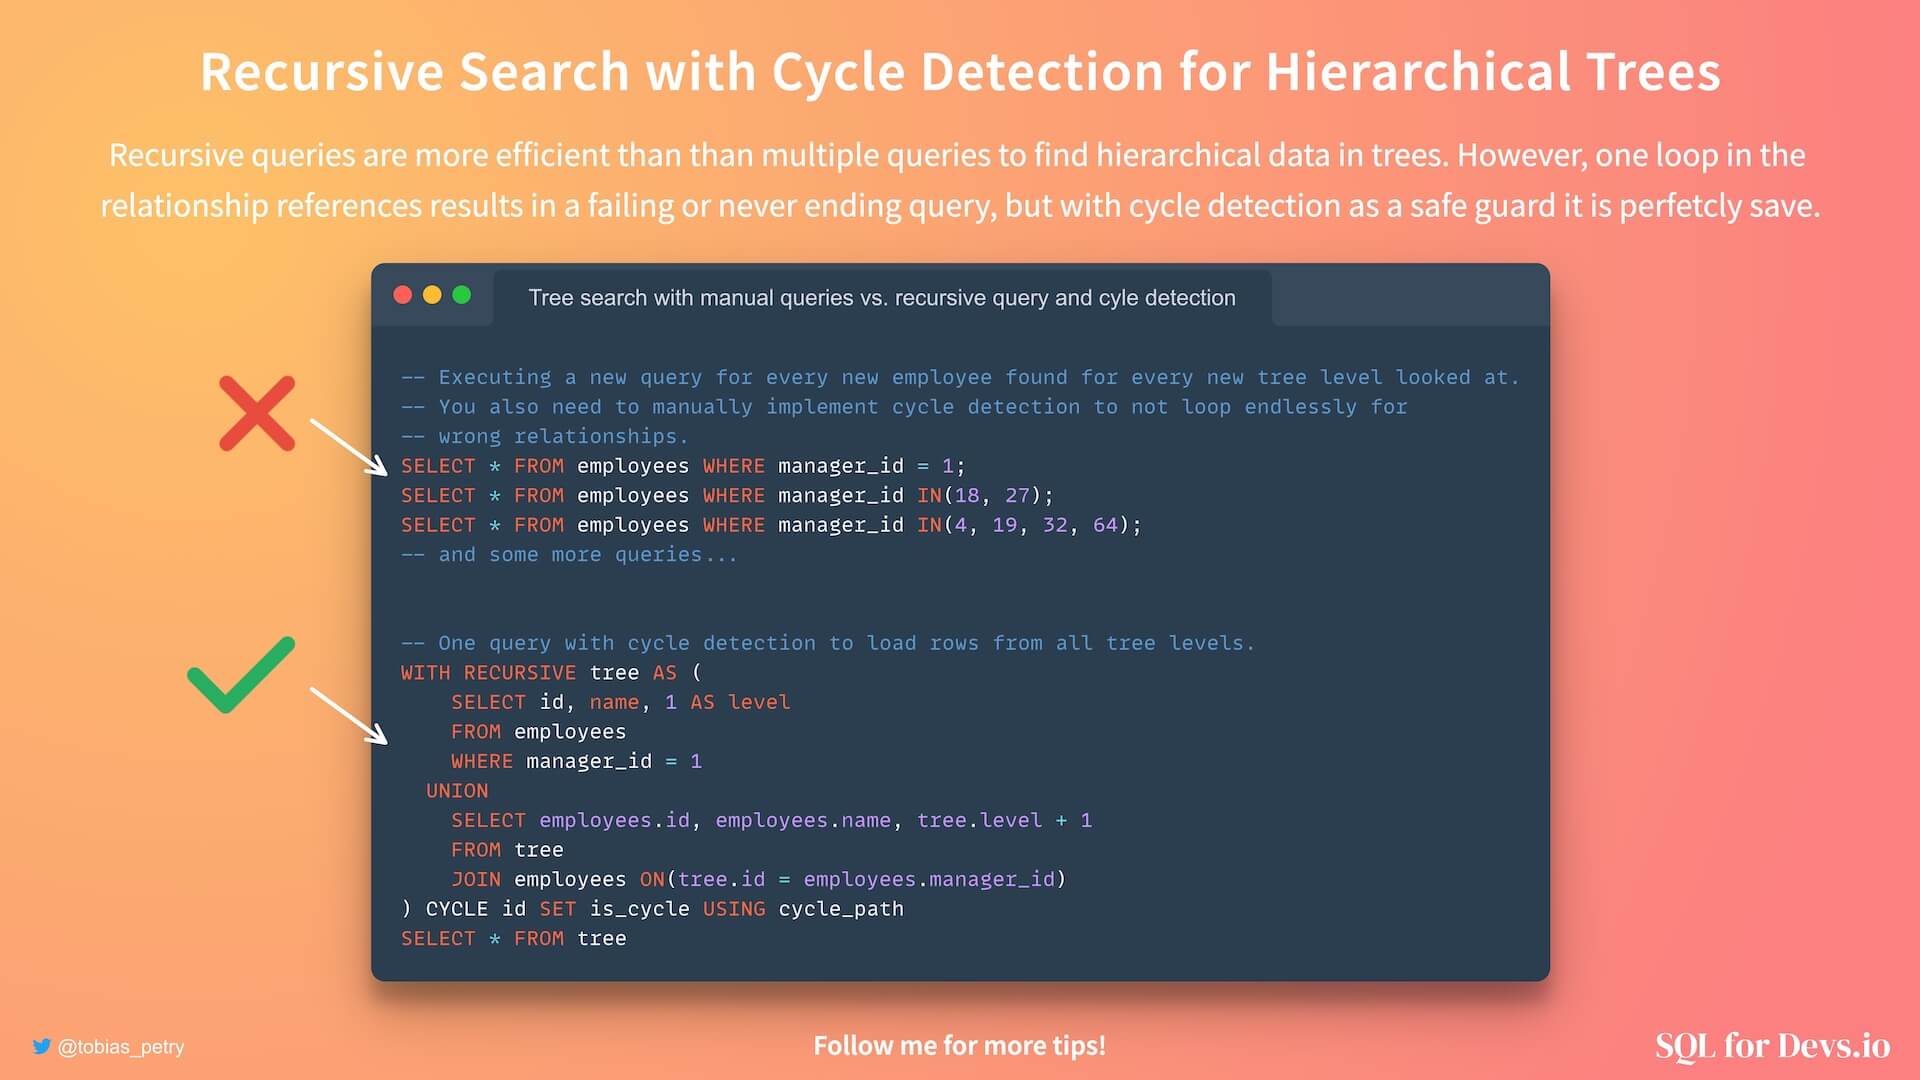 You can use recursive queries to query hierarchical trees